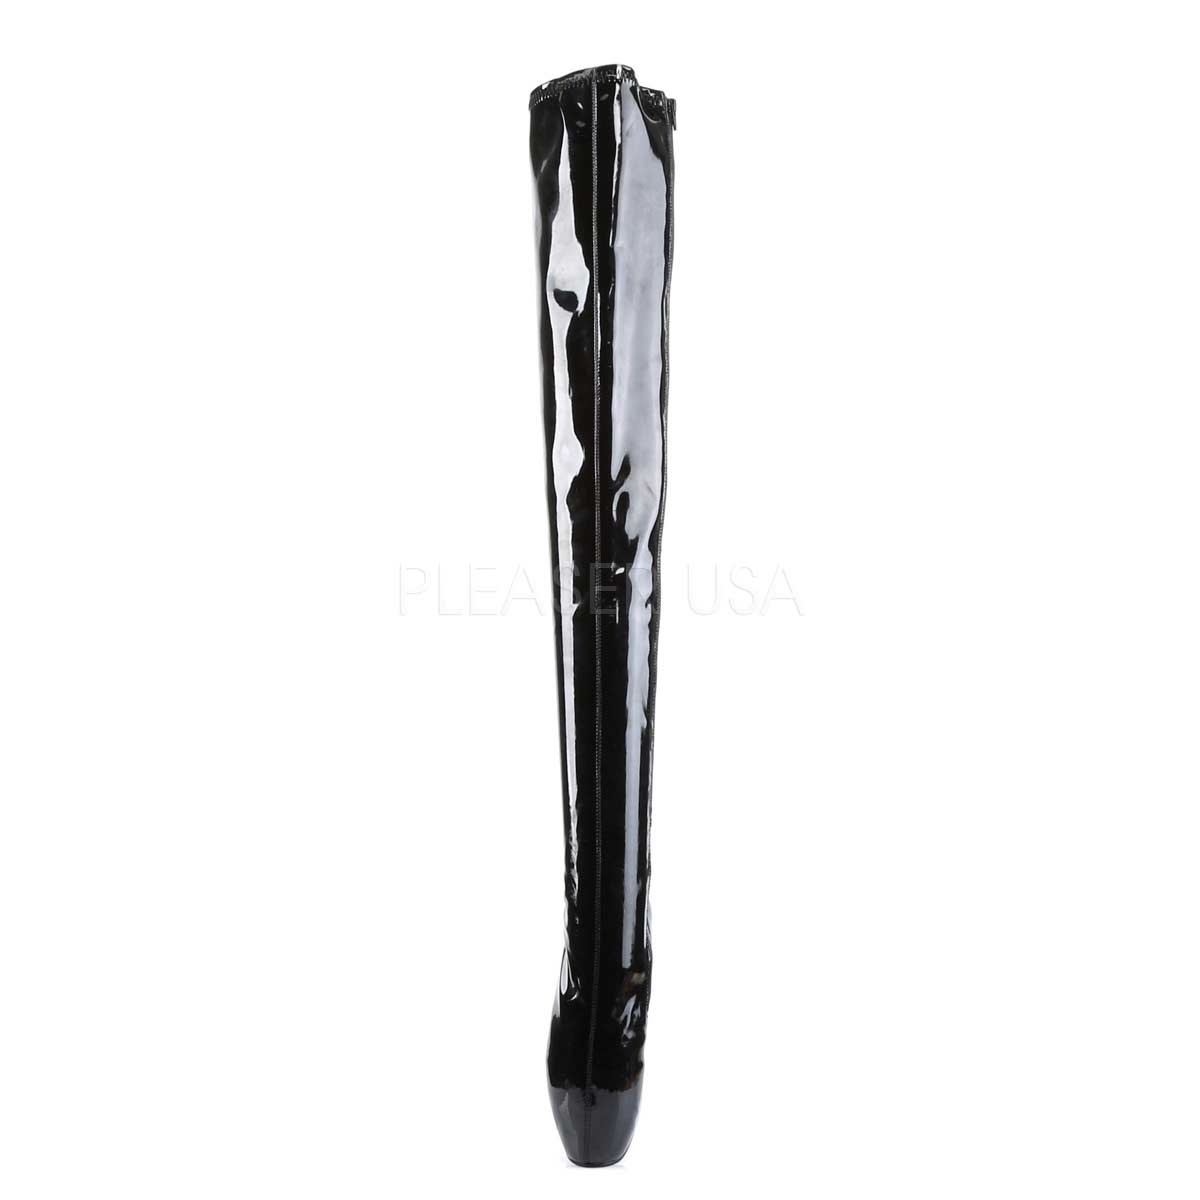 Pleaser Devious Ballet-3000 - Black Stretch Patent in Sexy Boots - $121.95